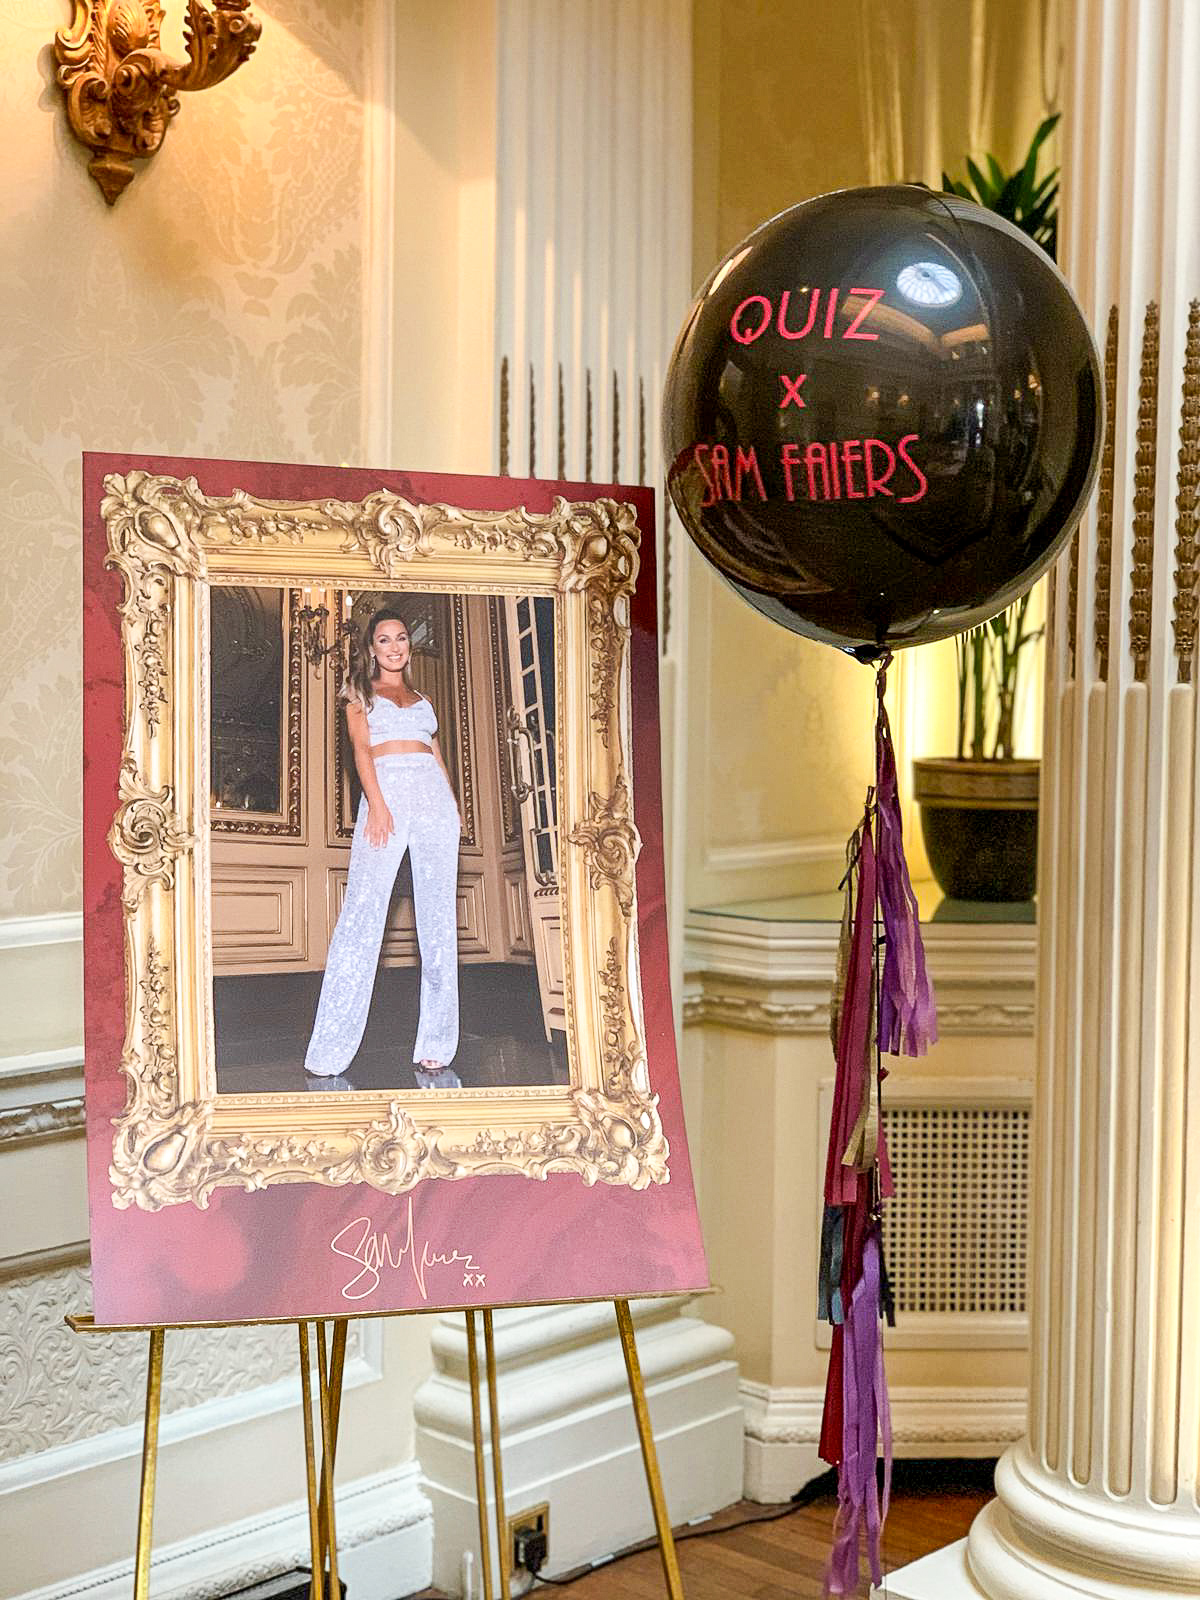 Quiz Hedsor Sam Faiers Launch install (5)